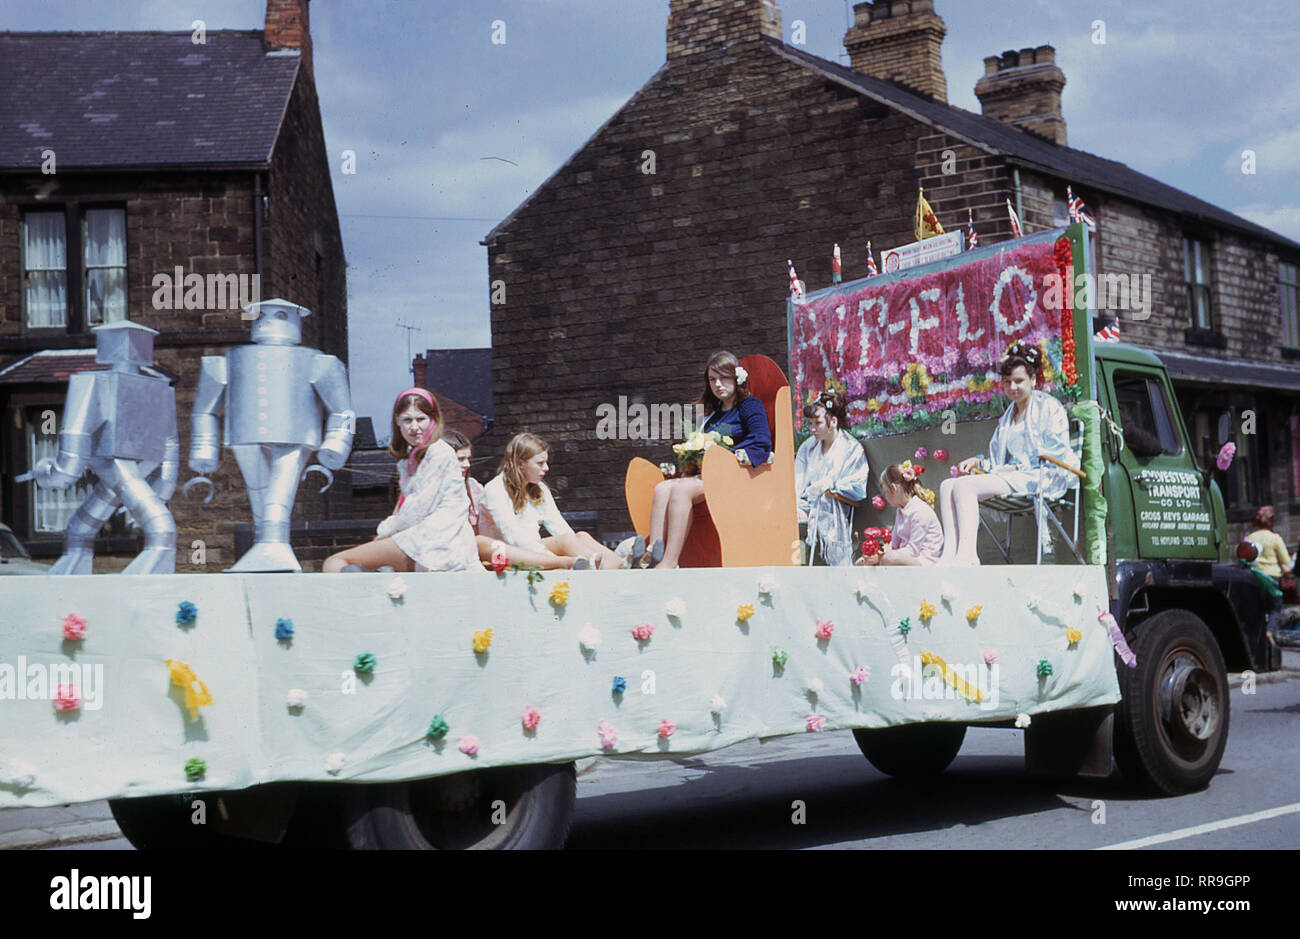 1960s, historical, travelling in a carnival through a northern village, England, UK. we see ladies and girls sitting on a decorated float - sponsored by 'Air-Flo' - on the back of an open Slyvesters Transport truck. Air-Flo was founded in the USA in the 1940s by three brothers looking for a better way to harvest onions and subsquently became leading manufacturers of harvesting equipment. Stock Photo